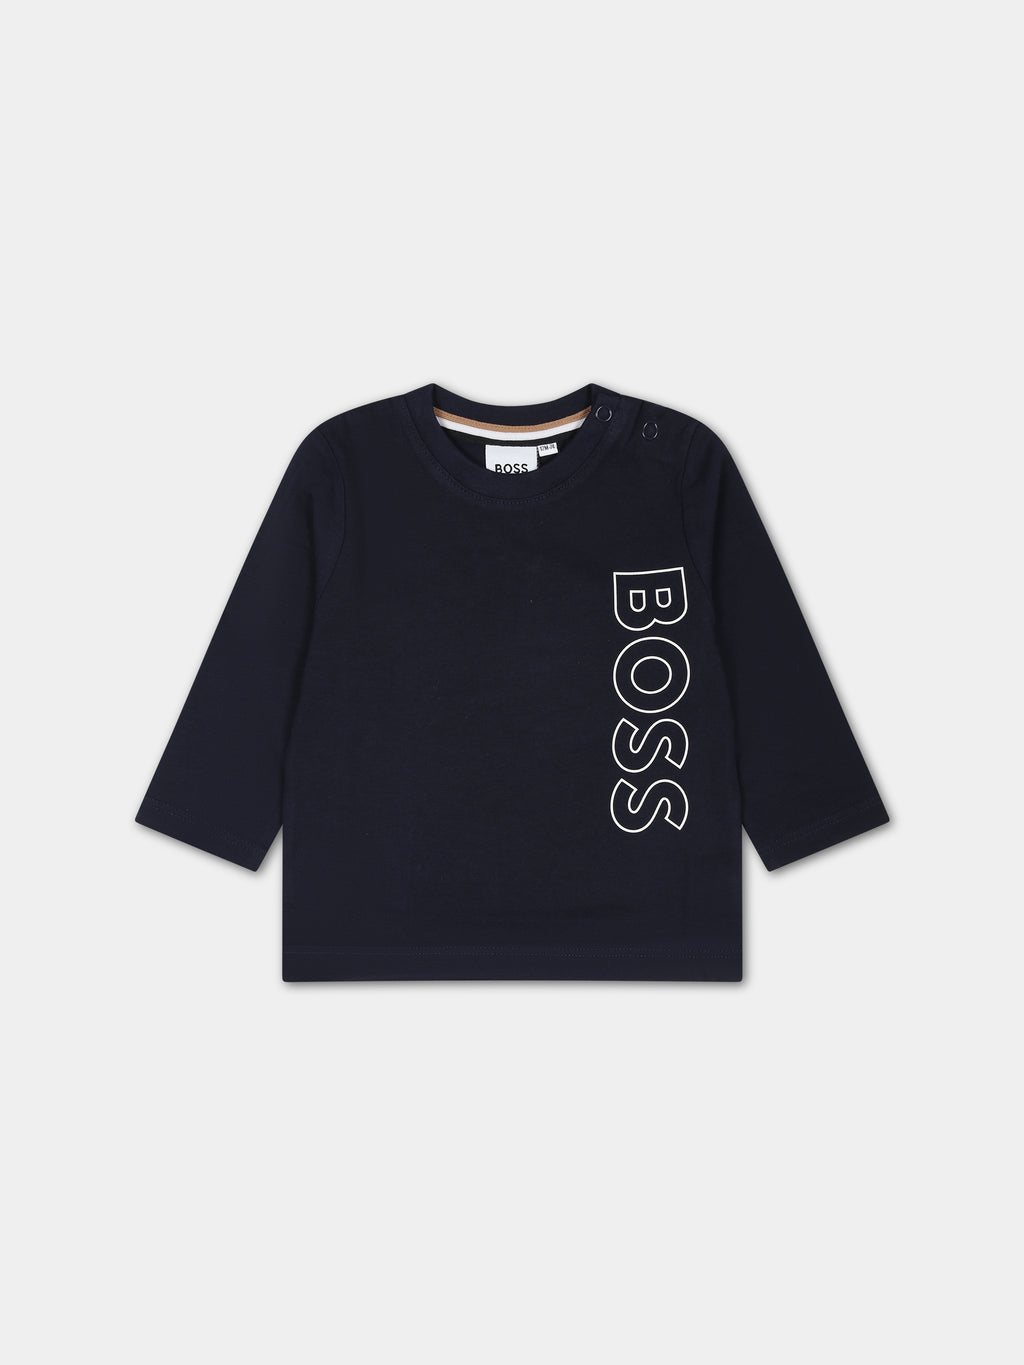 Blue t-shirt with logo for baby boy